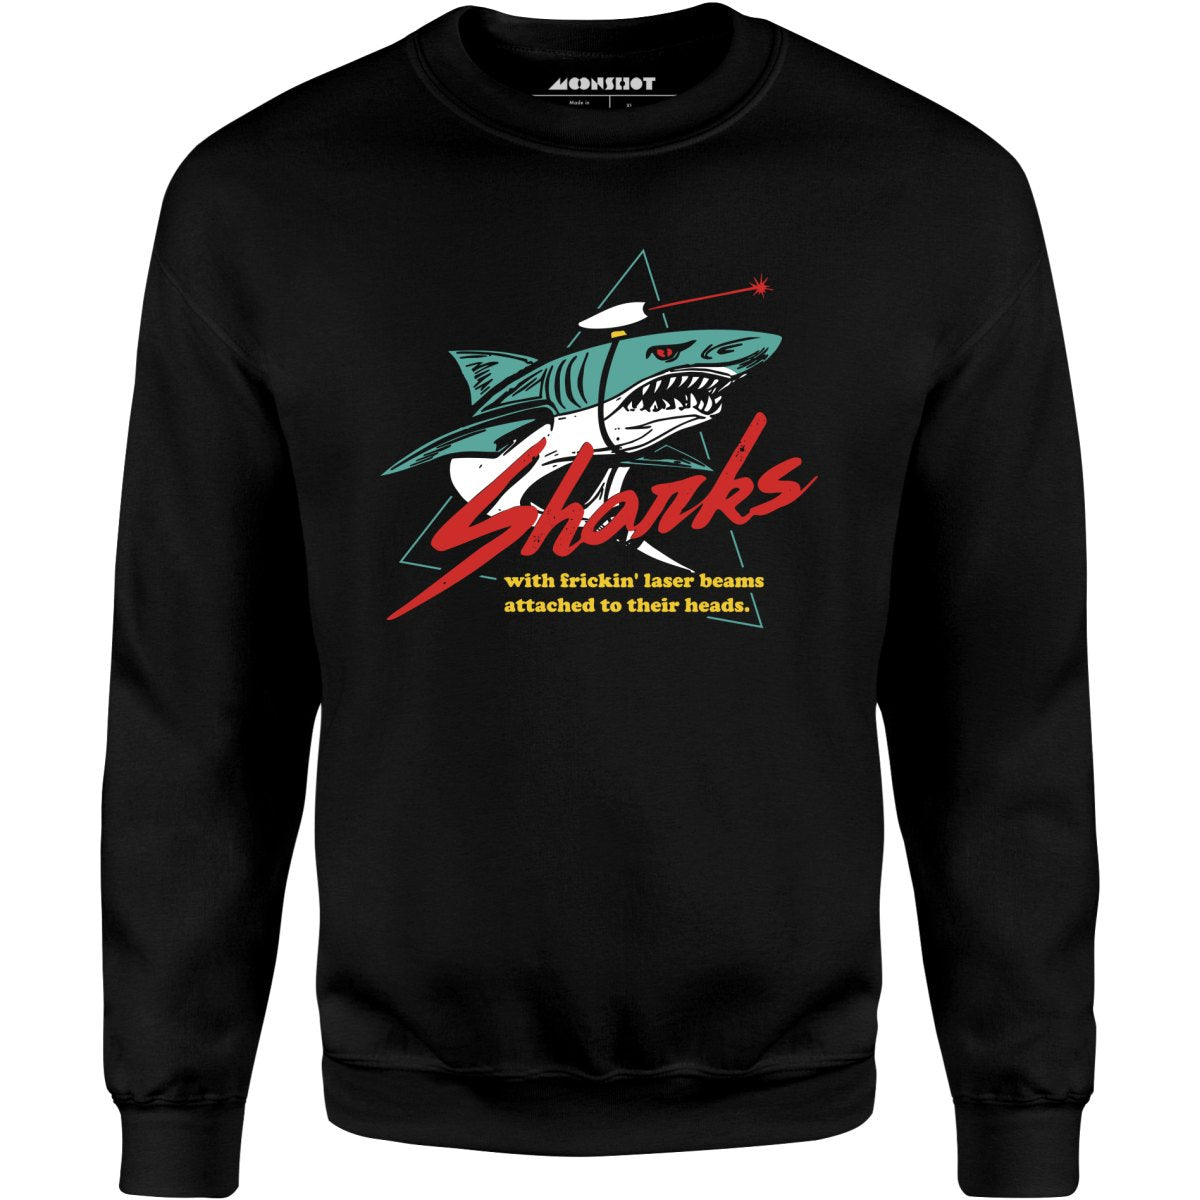 Sharks With Frickin' Laser Beams Attached to Their Heads - Unisex Sweatshirt